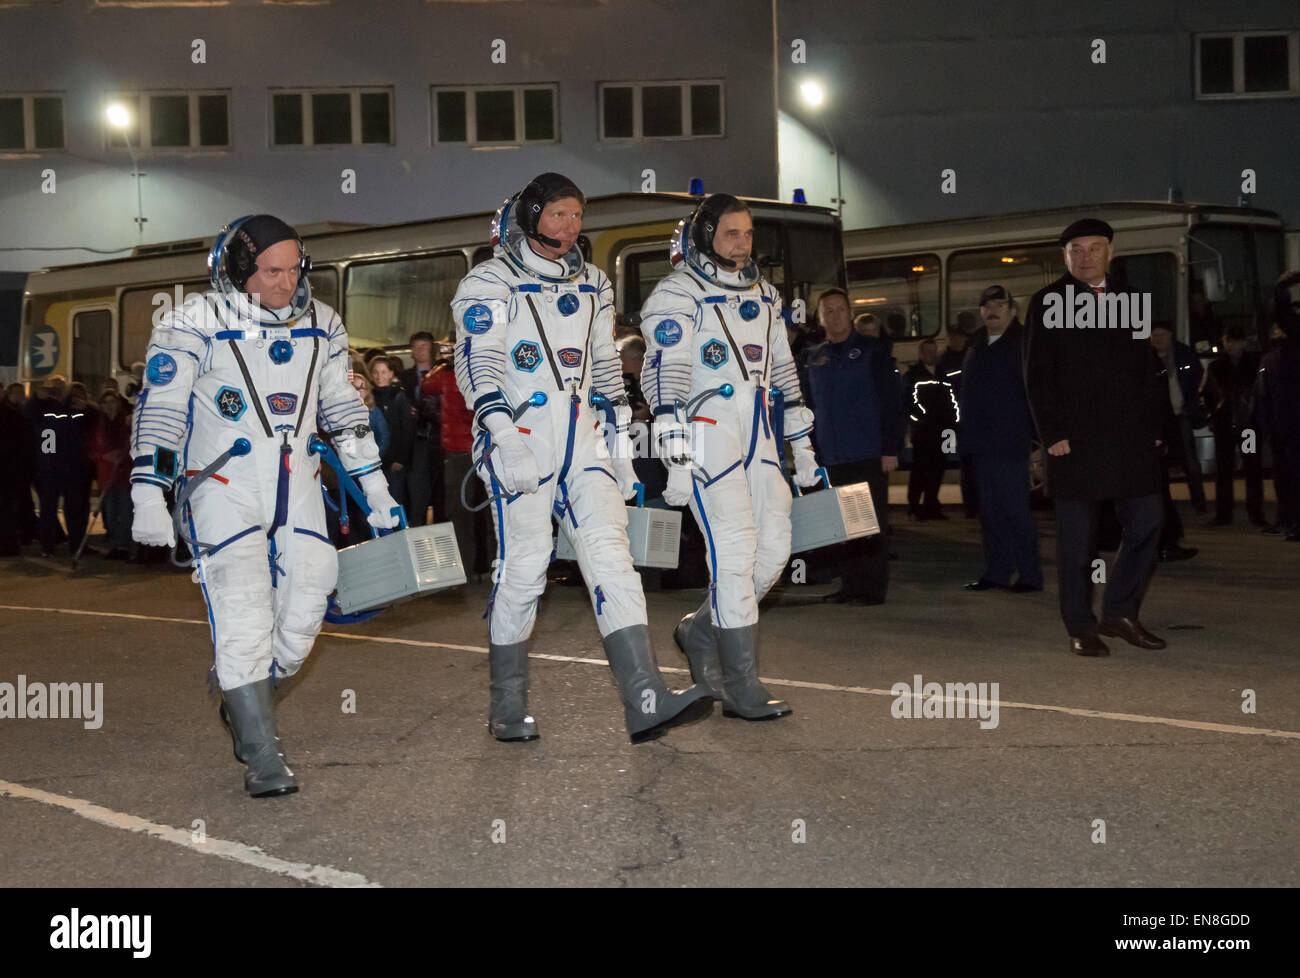 Expedition 43 NASA Astronaut Scott Kelly, left, and Russian Cosmonauts Gennady Padalka, center, and Mikhail Kornienko of the Russian Federal Space Agency (Roscosmos) depart building 254 for their launch onboard the Soyuz TMA-16M spacecraft to the International Space Station Friday, March 27, 2015 in Baikonor, Kazakhstan. Kelly, Padalka, and Kornienko launched to the ISS from the Baikonur Cosmodrome in Kazakhstan March 28, Kazakh time (March 27 Eastern time.) As the one-year crew, Kelly and Kornienko will return to Earth on Soyuz TMA-18M in March 2016.   (NASA/Victor Zelentsov) Stock Photo